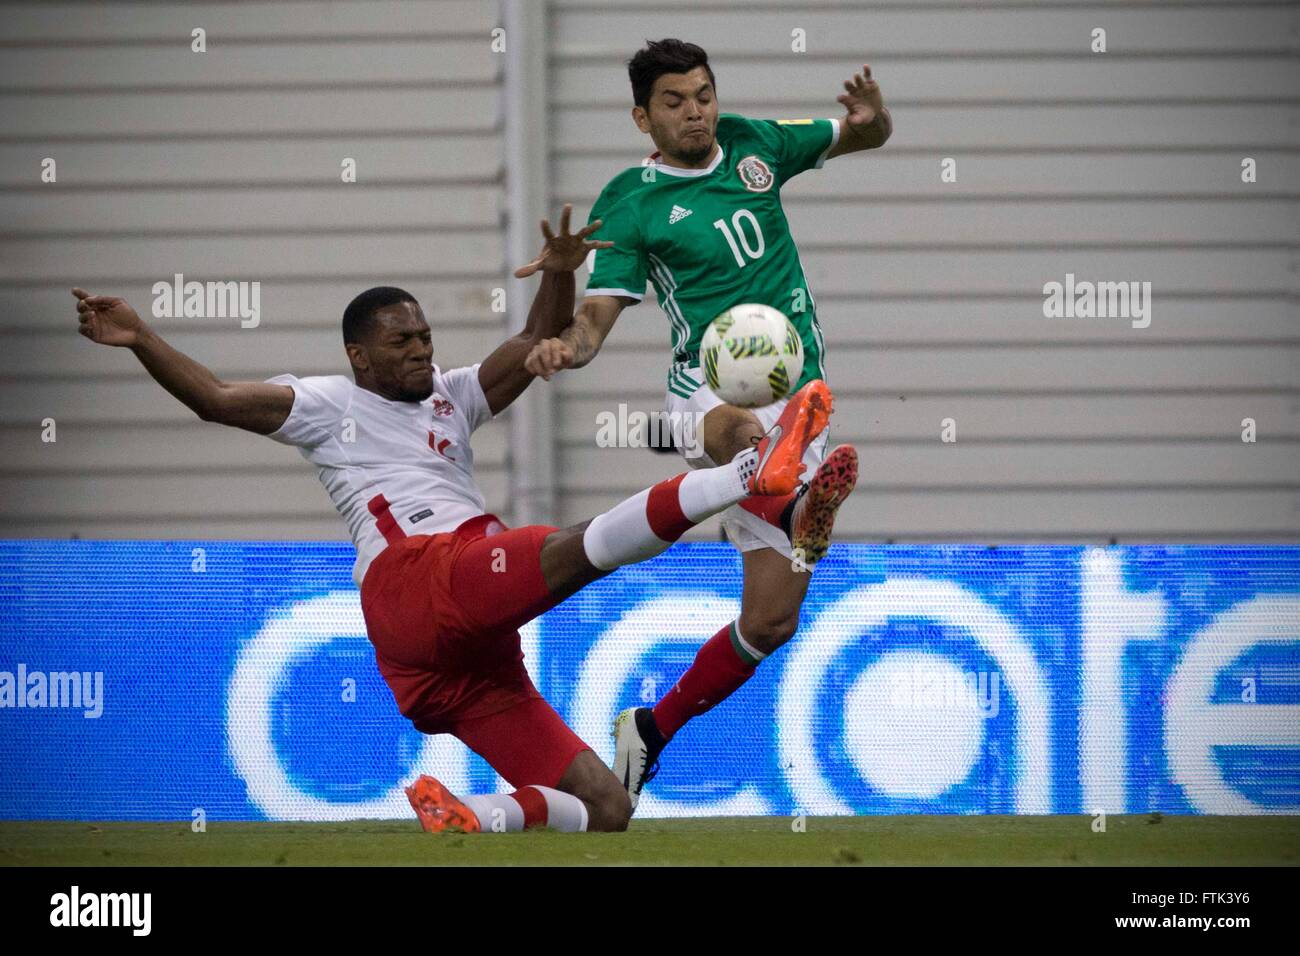 Ciudad De Mexico, Mexico. 29th Mar, 2016. Mexico's Jesus Corona (R) vies with Canada's Doneil Henry during the qualifying match for 2018 Russia World Cup at Azteca Stadium in Mexico City, capital of Mexico, on March 29, 2016. Mexico won 2-0. © Alejandro Ayala/Xinhua/Alamy Live News Stock Photo